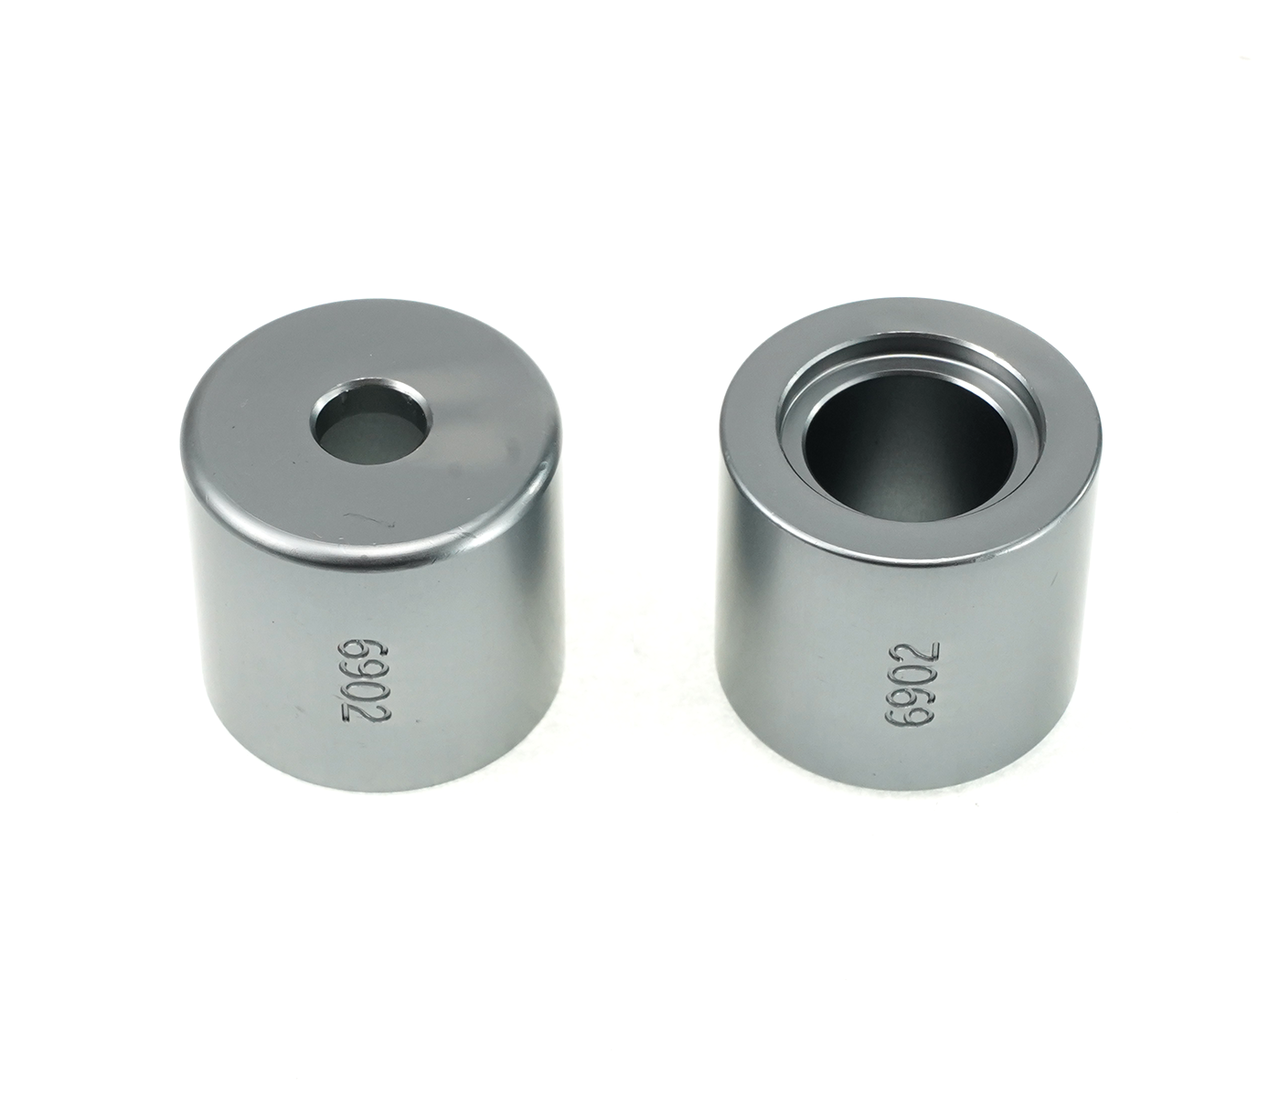 Enduro HT 6902 Outer - Outer Bearing Guide for Bearing Press (BRT-005 or BRT-050) - single guide only